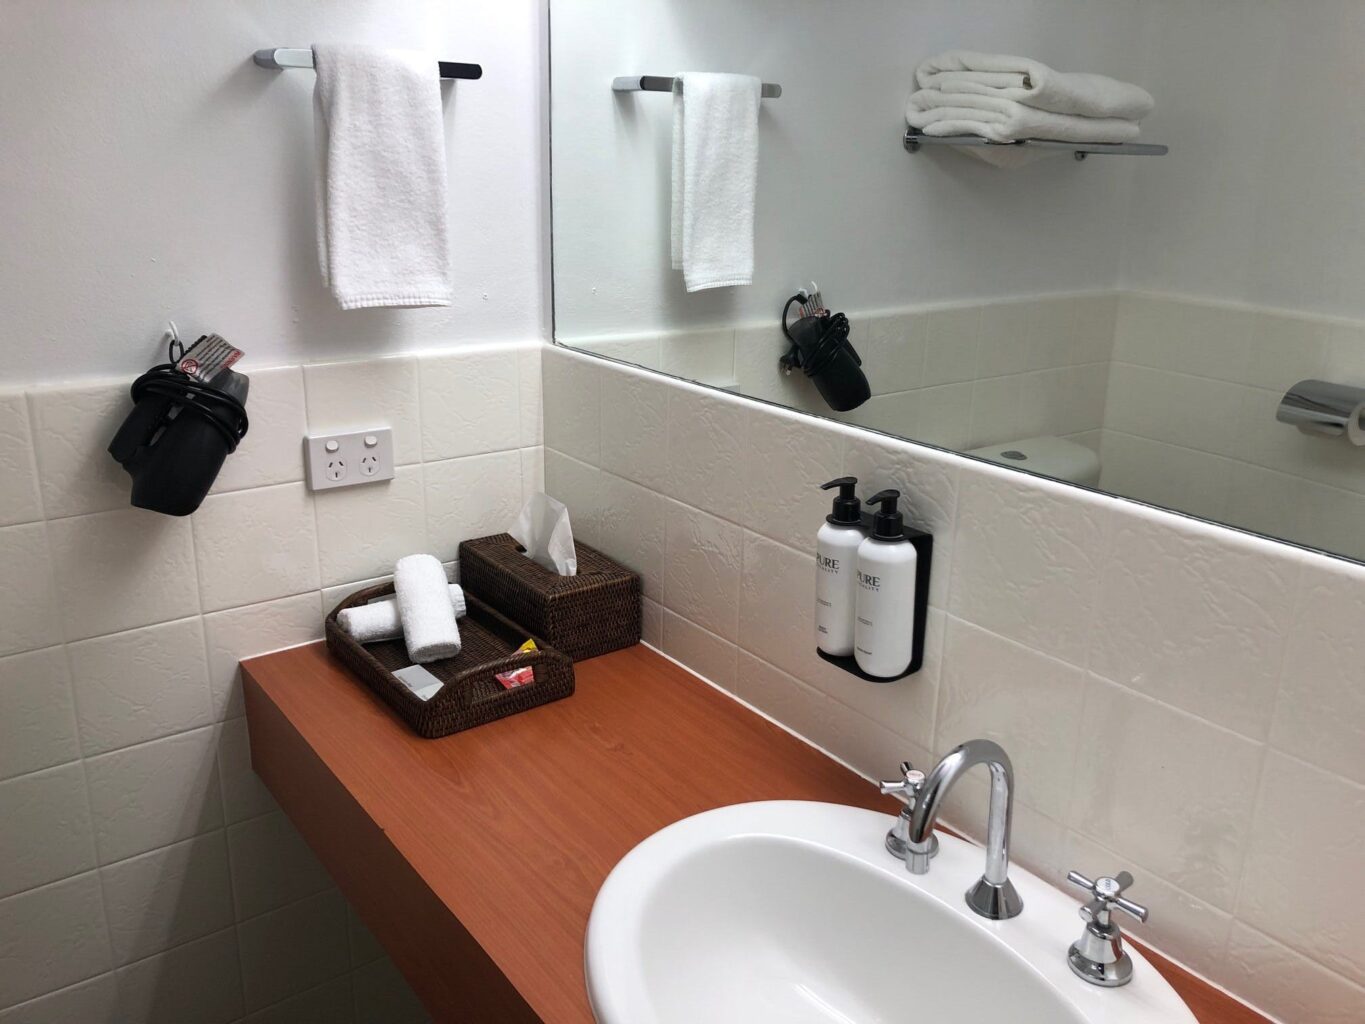 Bathroom with amenities and hairdryer